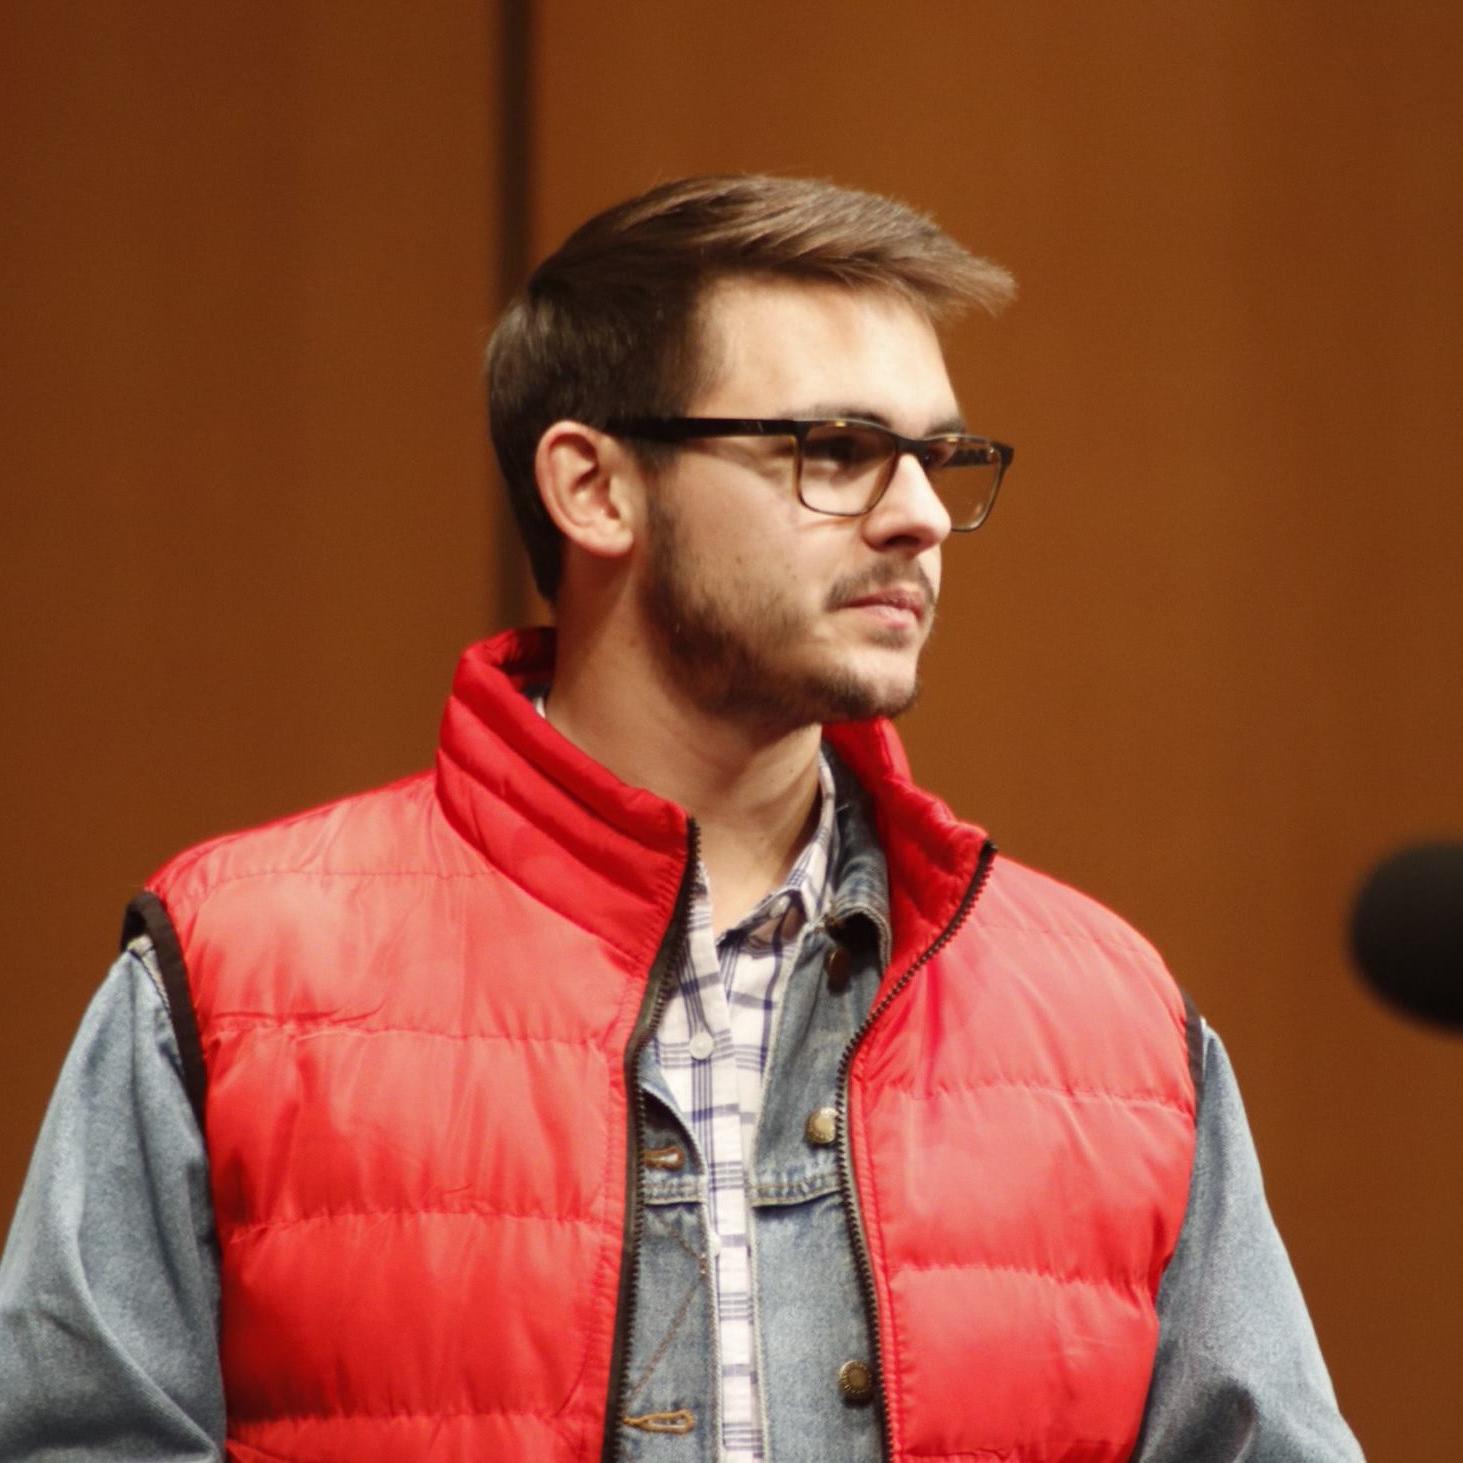 Ben Wykoff dressed as Marty McFly for the Alliance Symphony Orchestra Halloween Concert, 2022